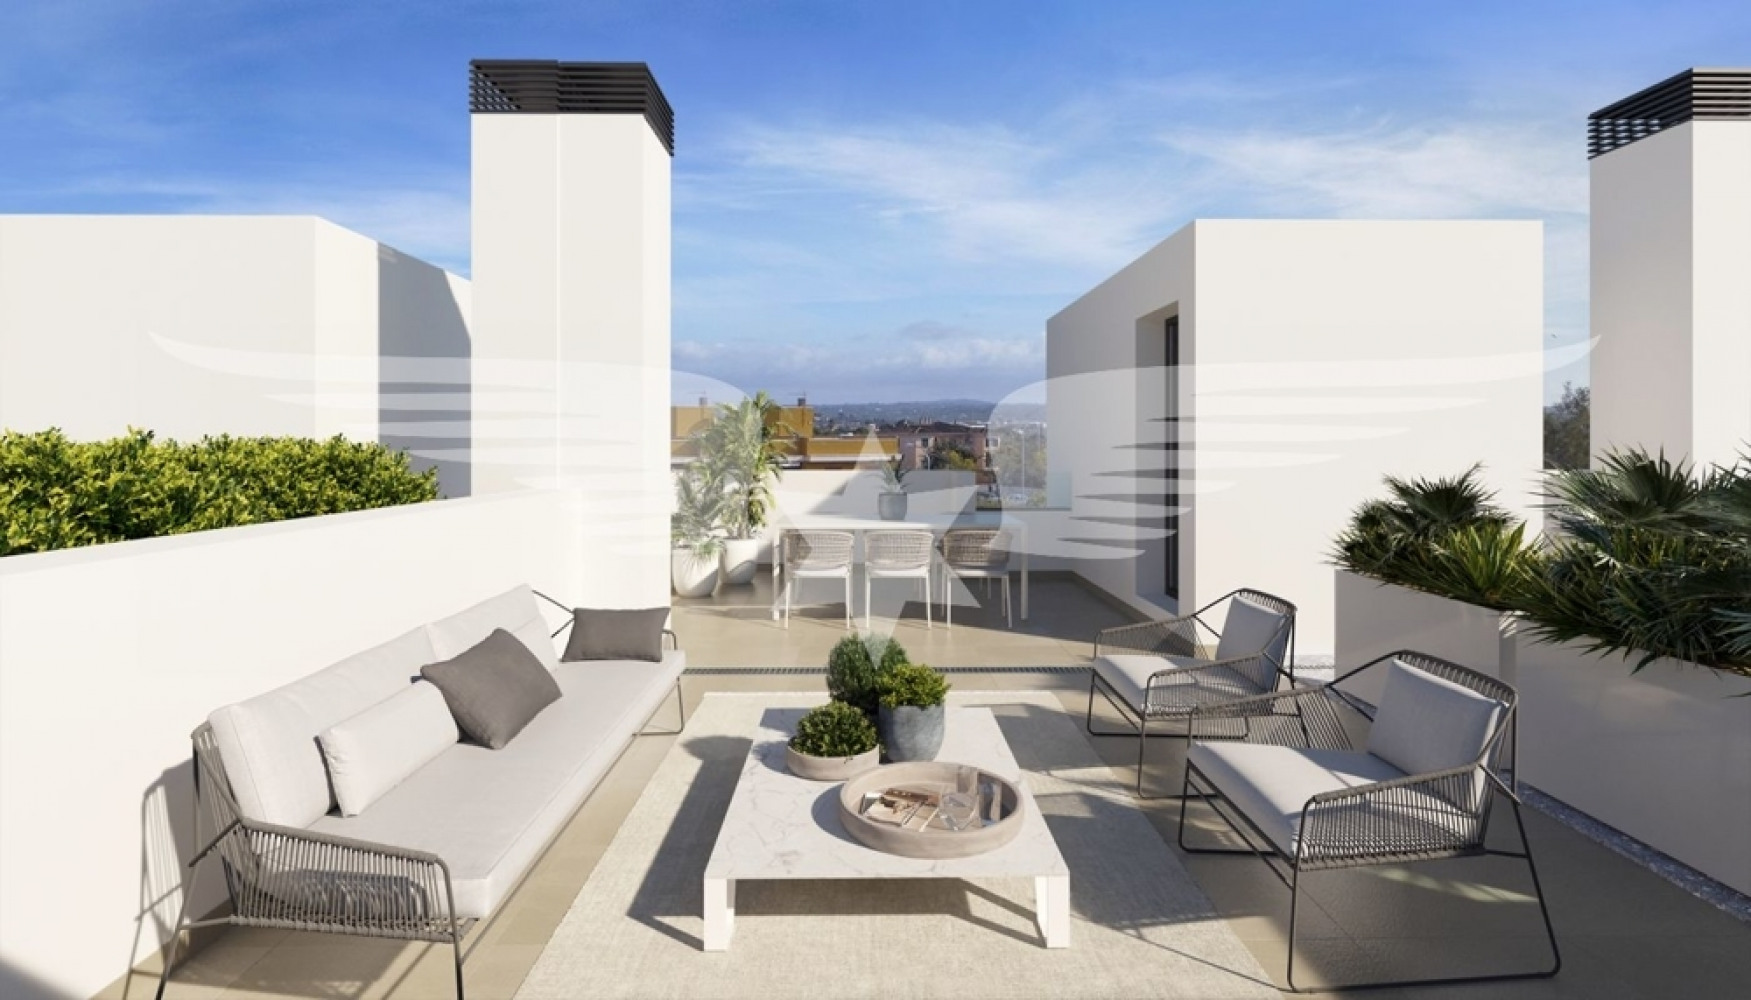 Visualized roof-terrace